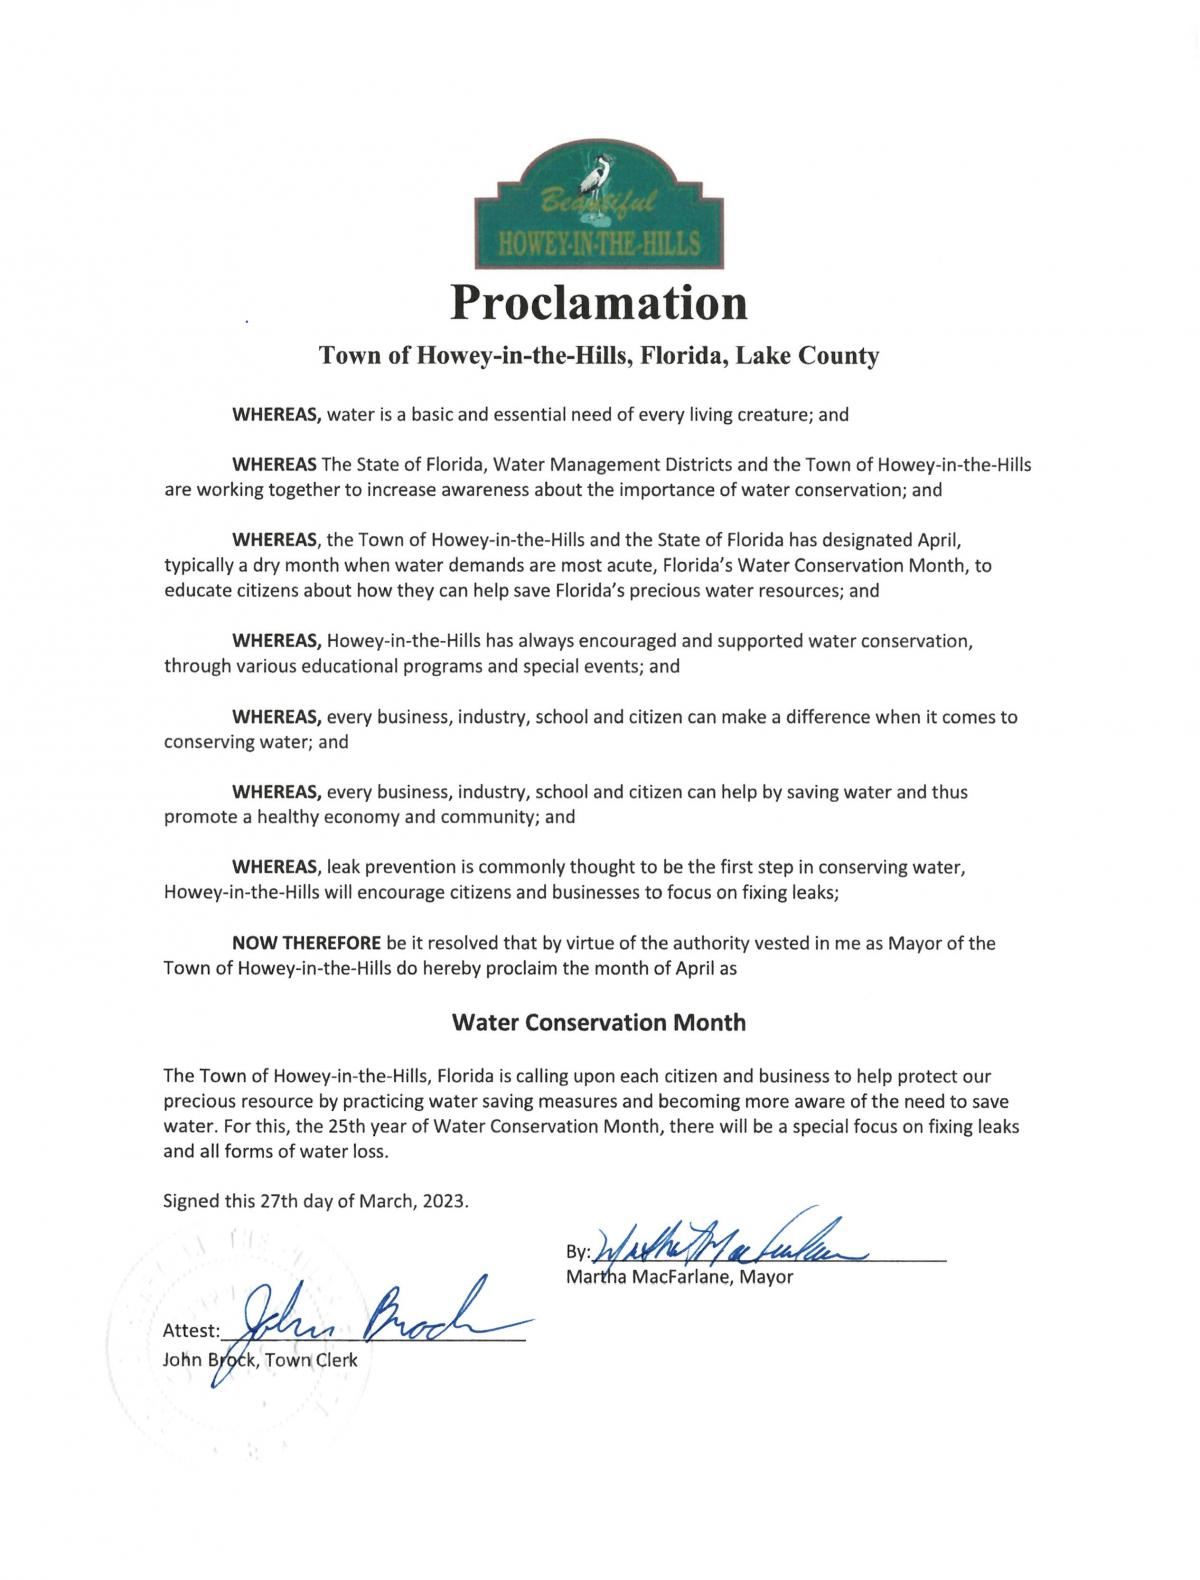 Image of the 2023 Water Conservation Proclamation